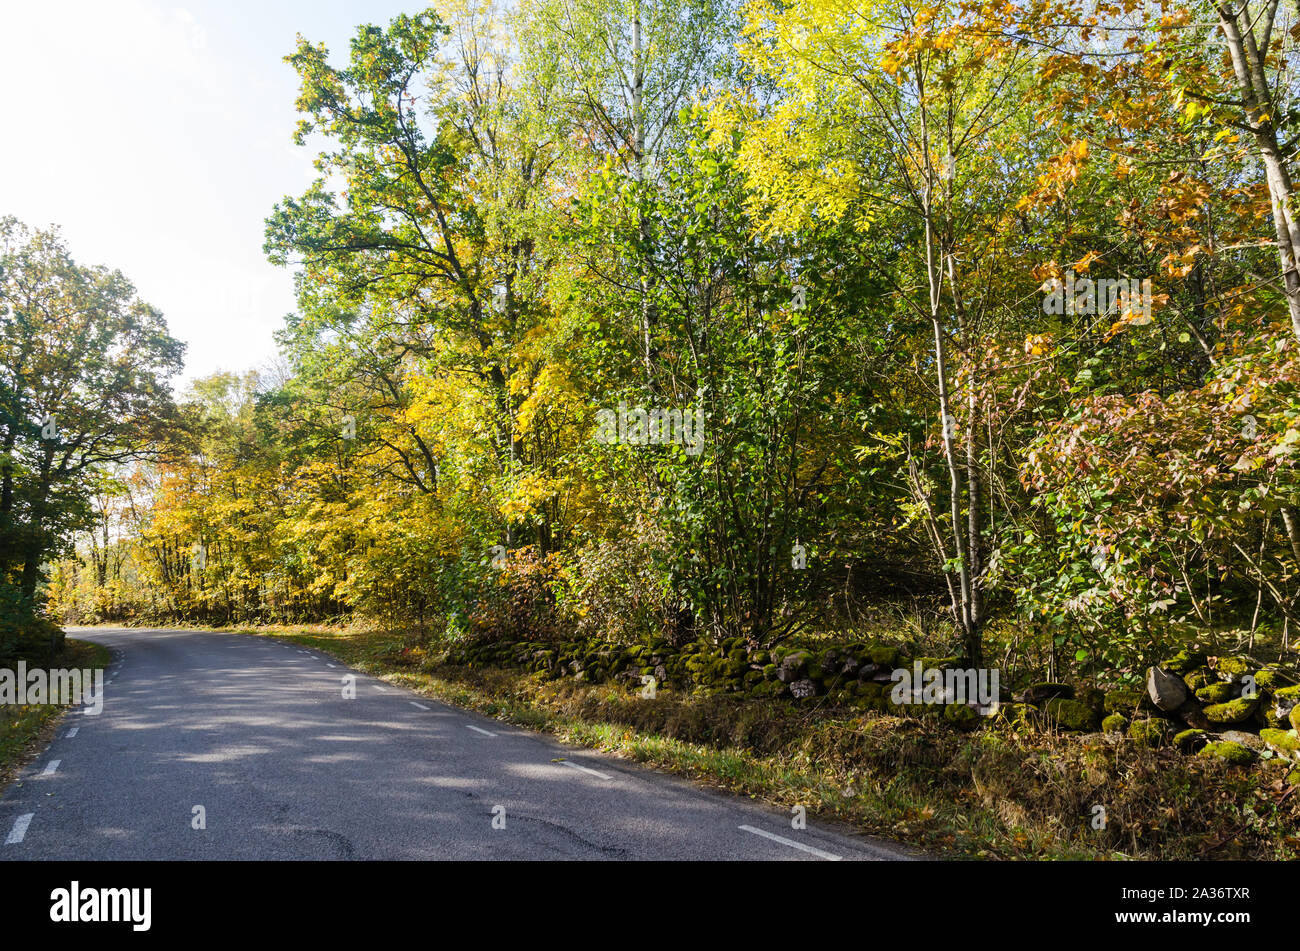 Beautiful sunlit curved country road with trees in fall colors by road side Stock Photo